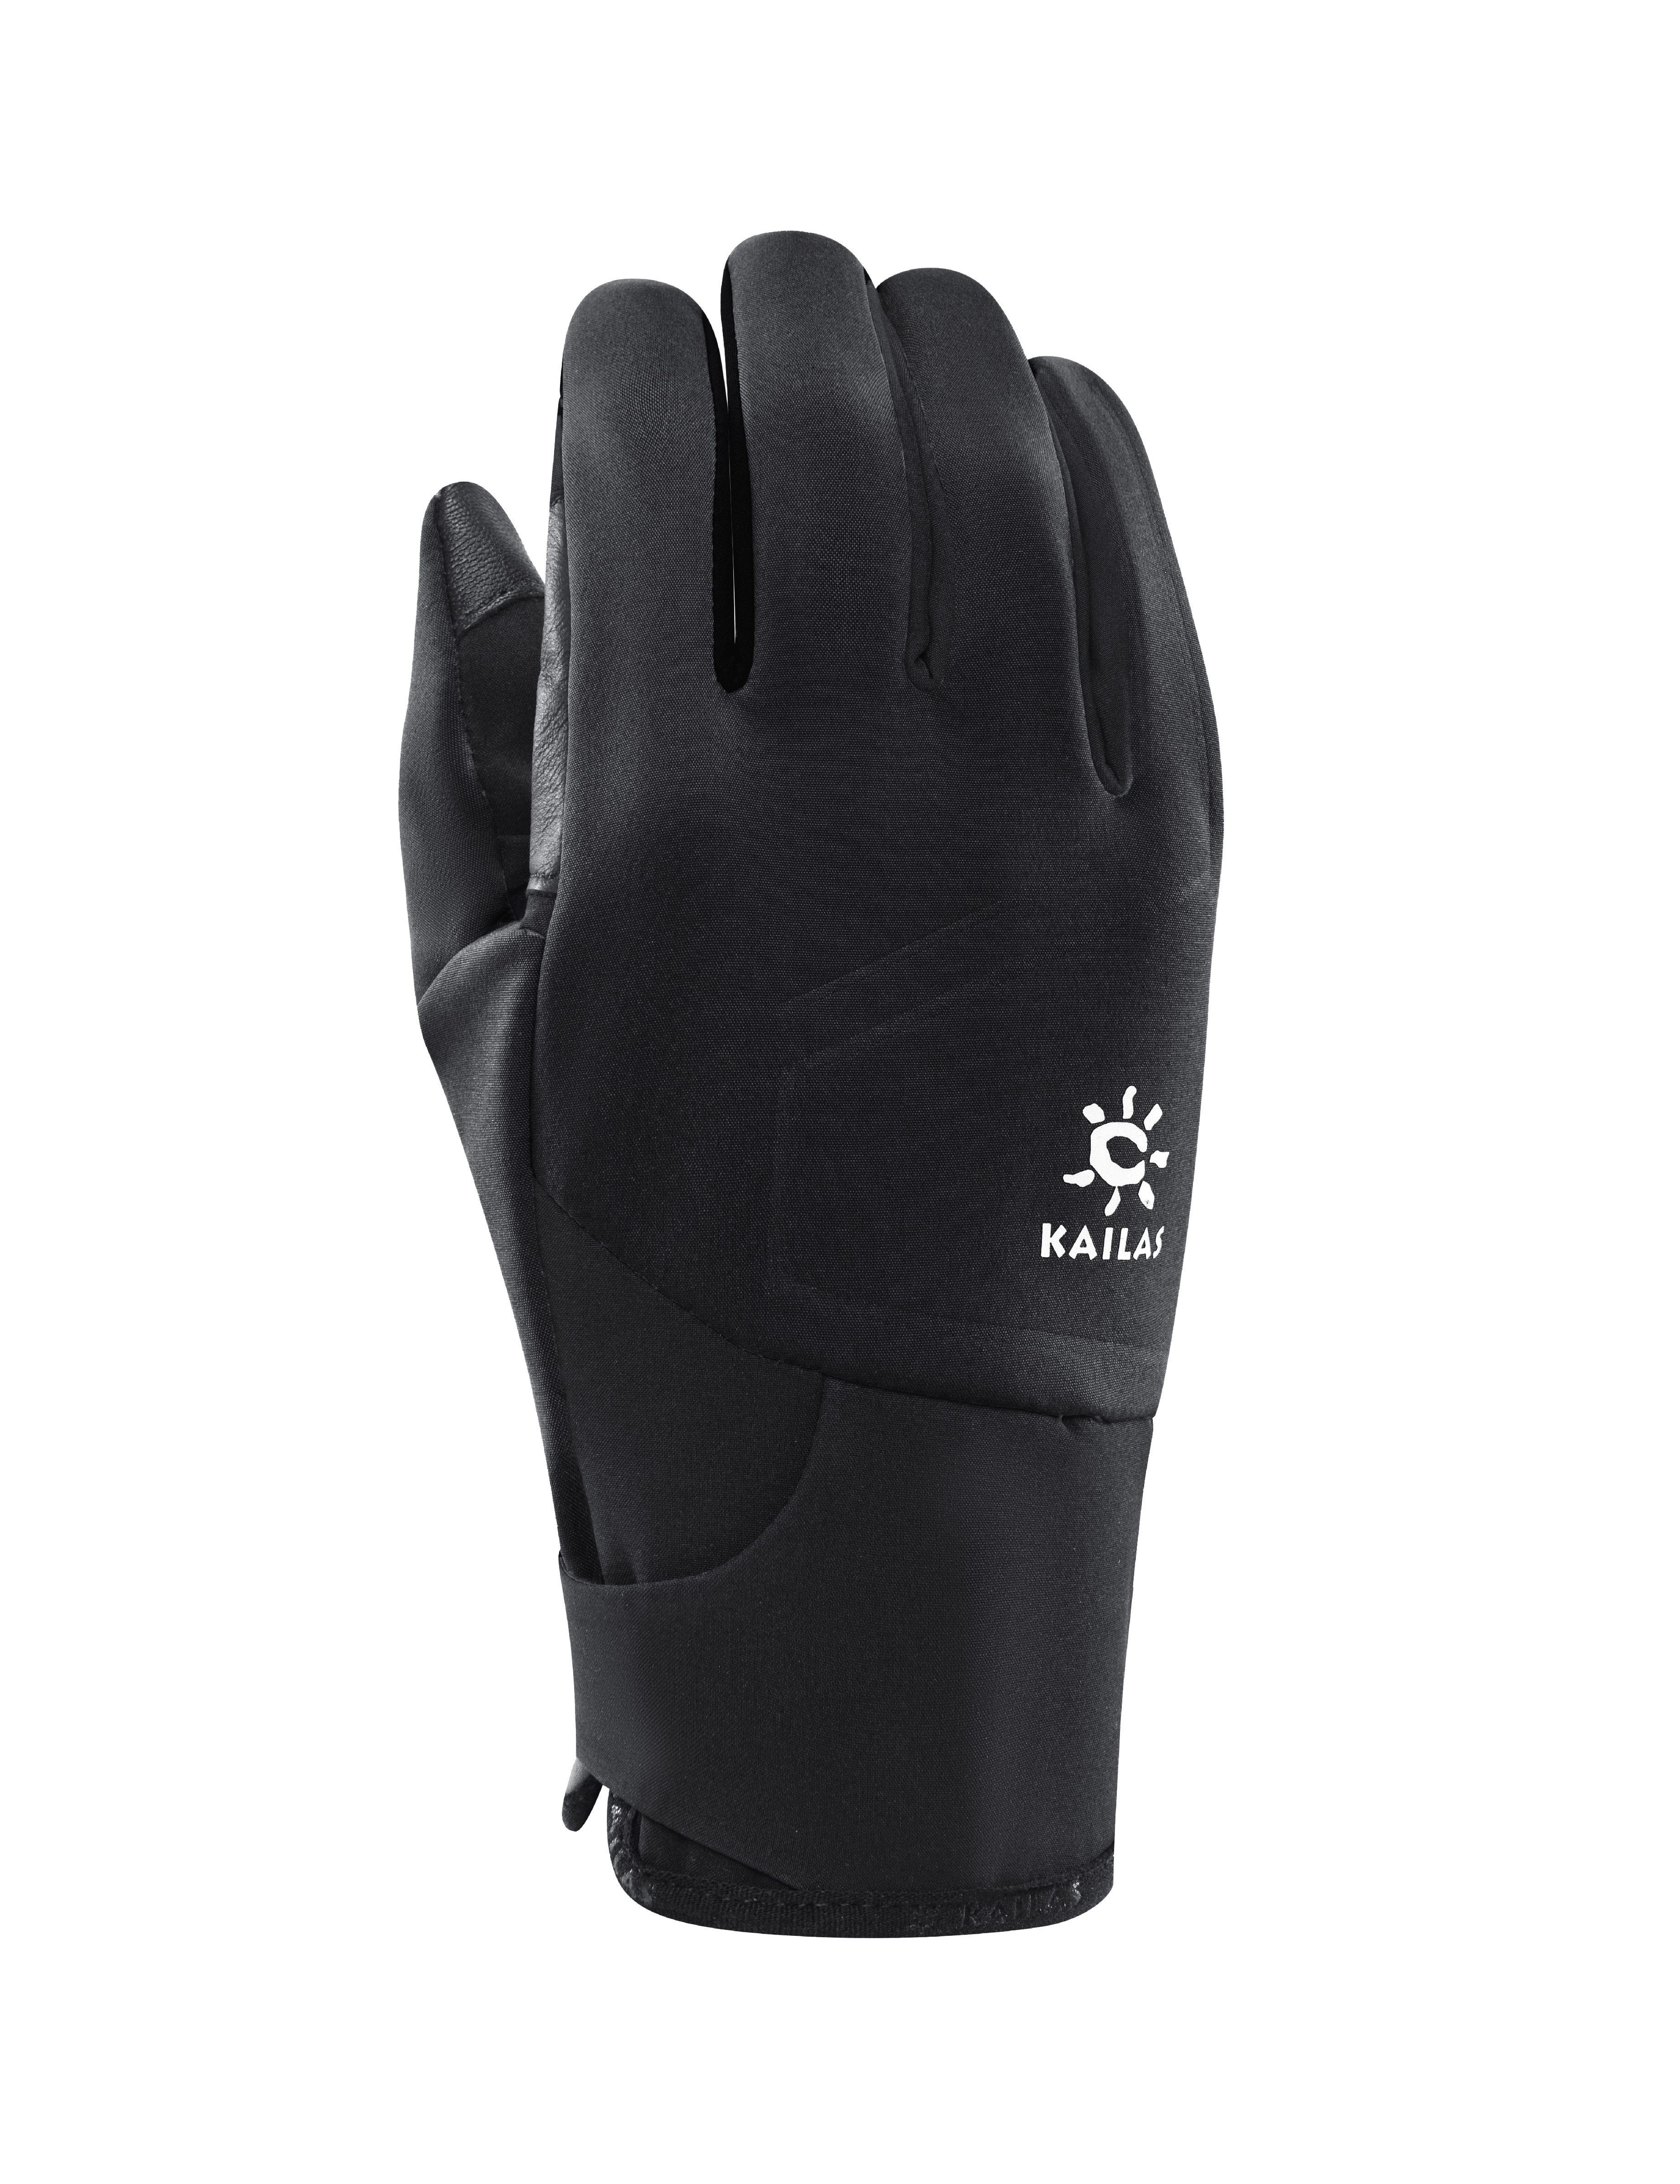 Kailas Wind Master II GORE-TEX Windproof Touchscreen Hiking Gloves Women